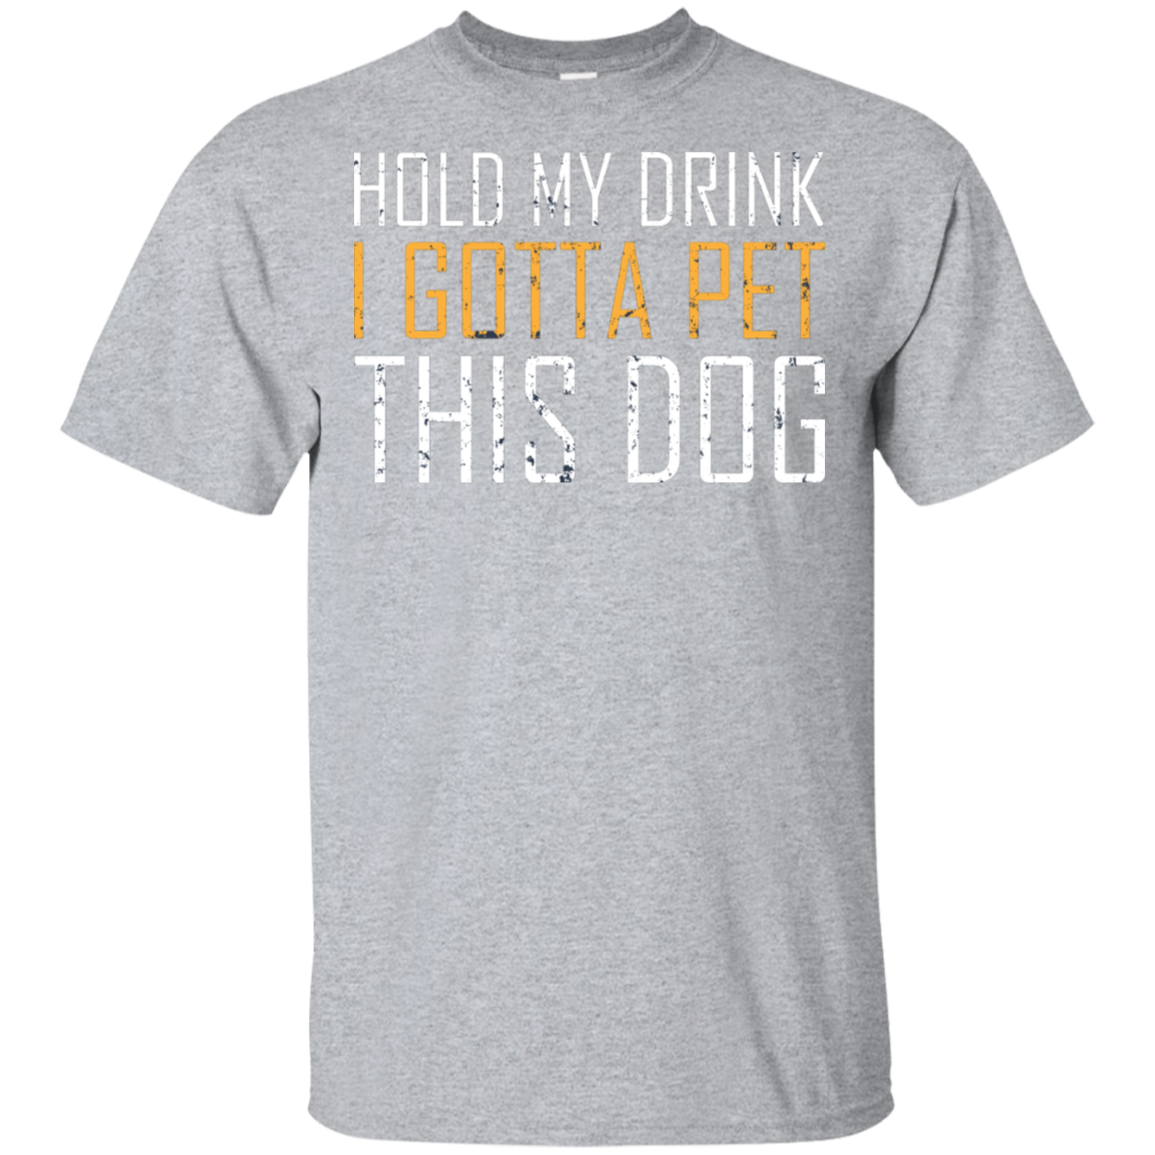 Hold My Drink I Gotta Pet This Dog T-Shirt Apparel - The Beer Lodge